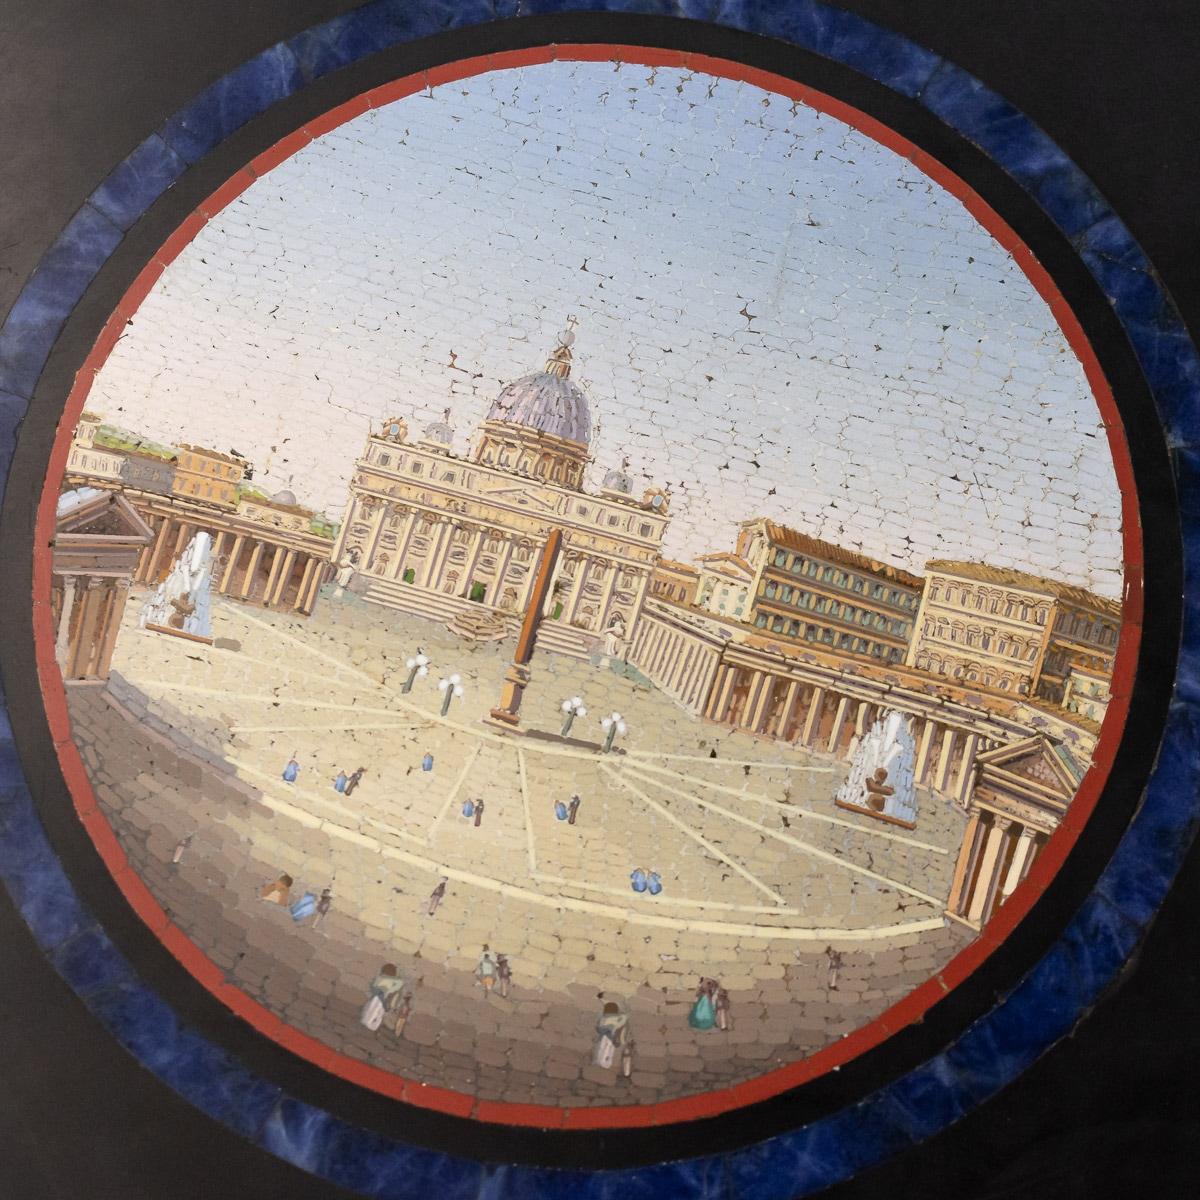 Description

Antique 19th century Italian Grand Tour Micromosaic tabletop centered by a roundel showing St. Peter's Square within a lapiz lazuli border, and surrounded by six ovals depicting the Temple of Vesta, St. Angel Castle and the Tiber